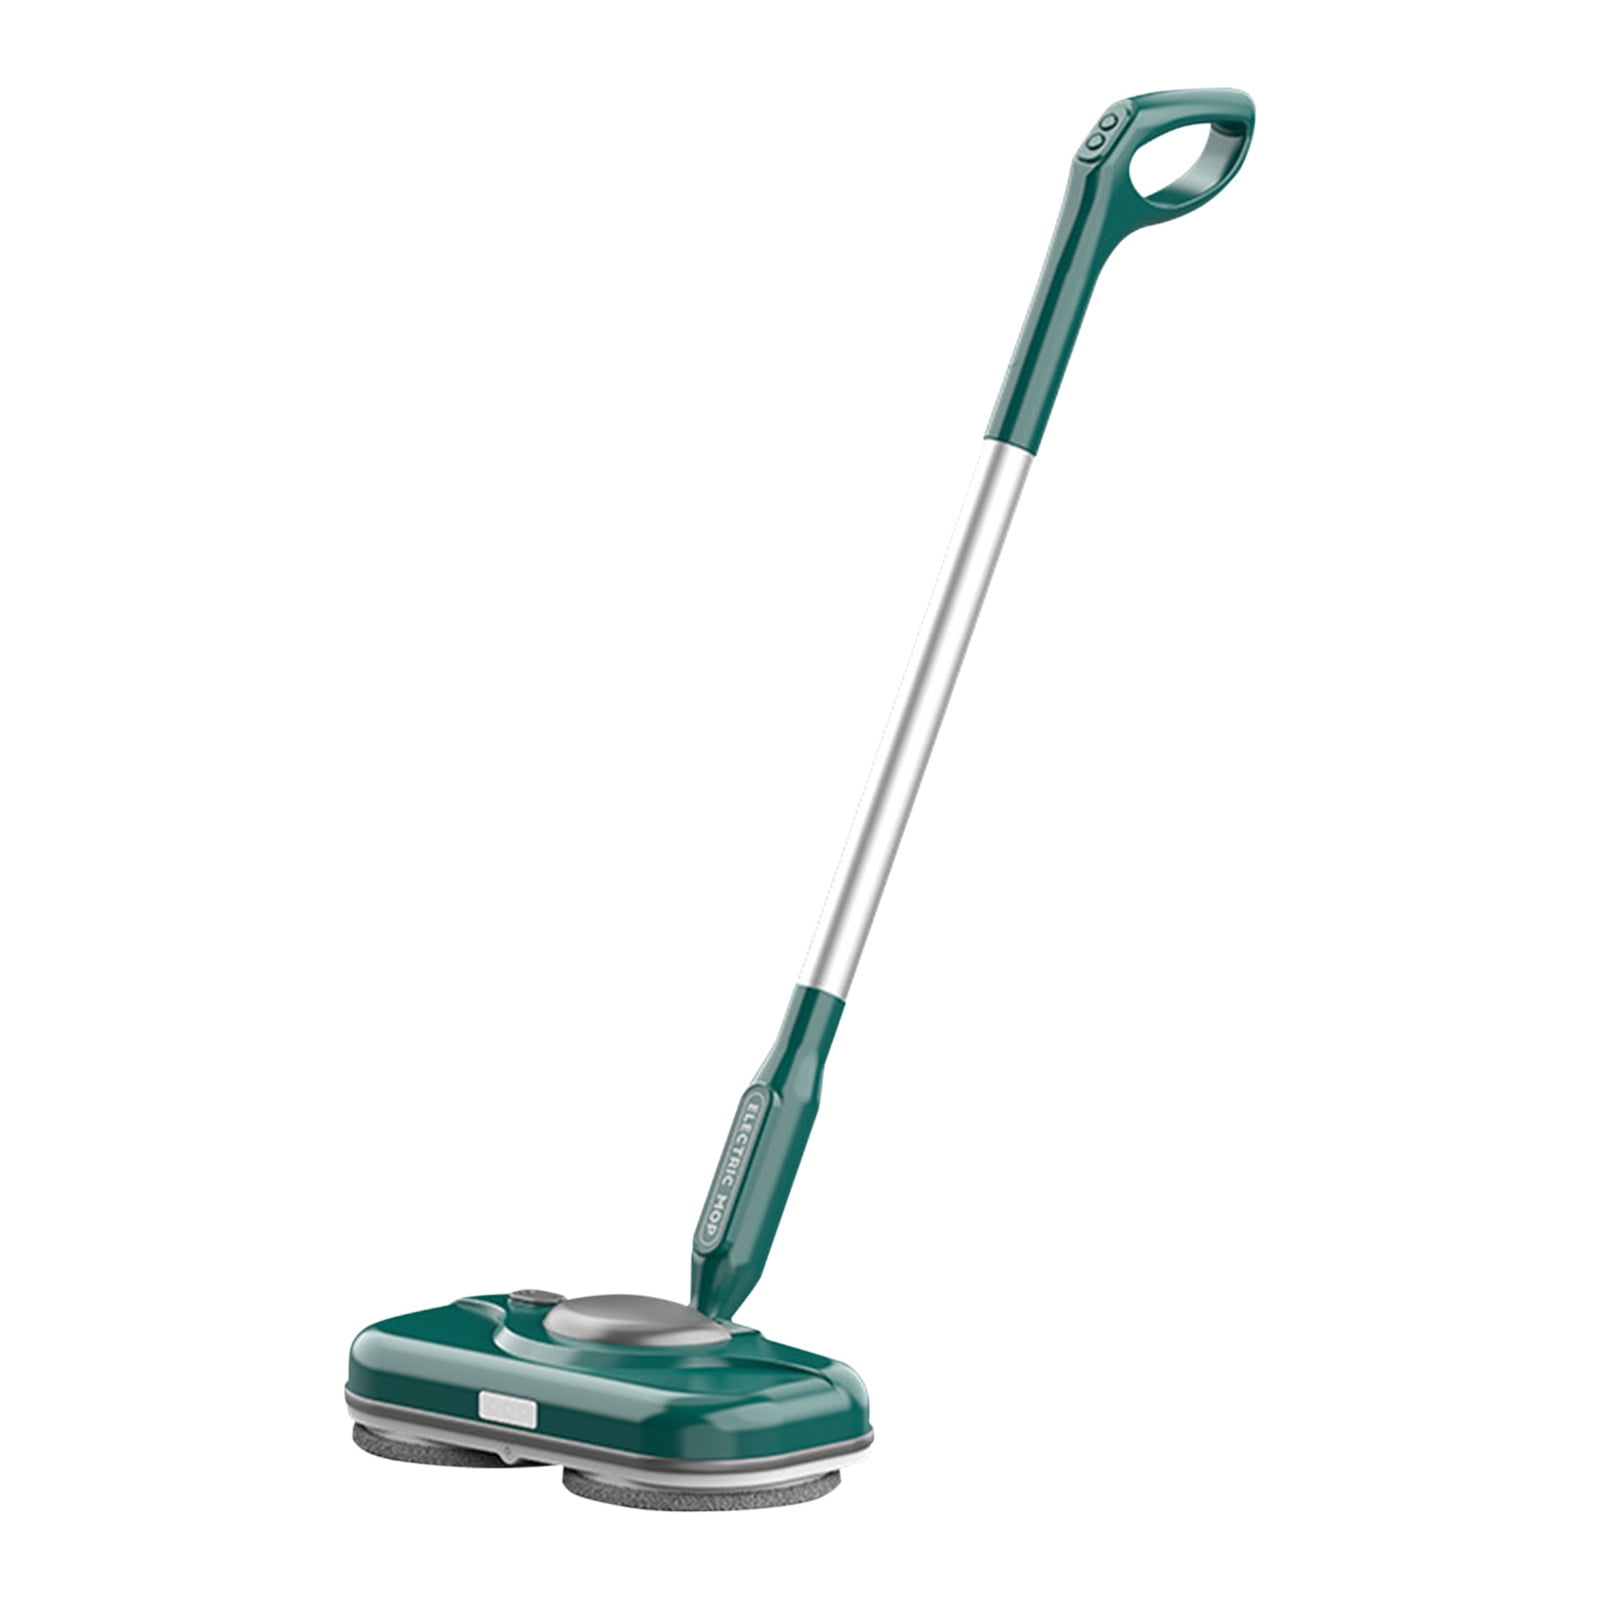 Vikakiooze Electric Mop, Cordless Floor Cleaner LED Headlight and